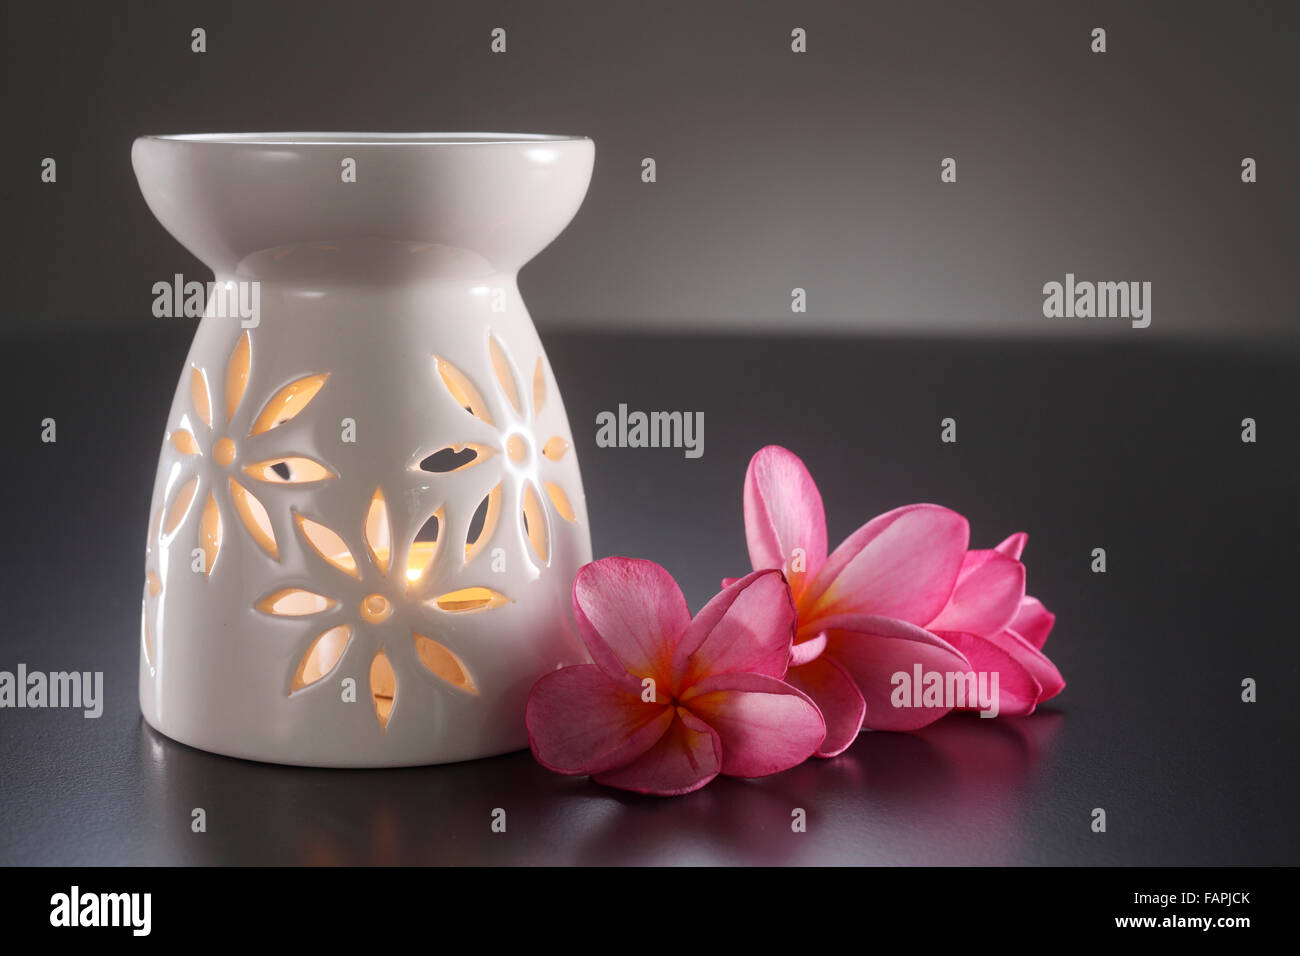 oil burner with the frangipani flower by the side Stock Photo